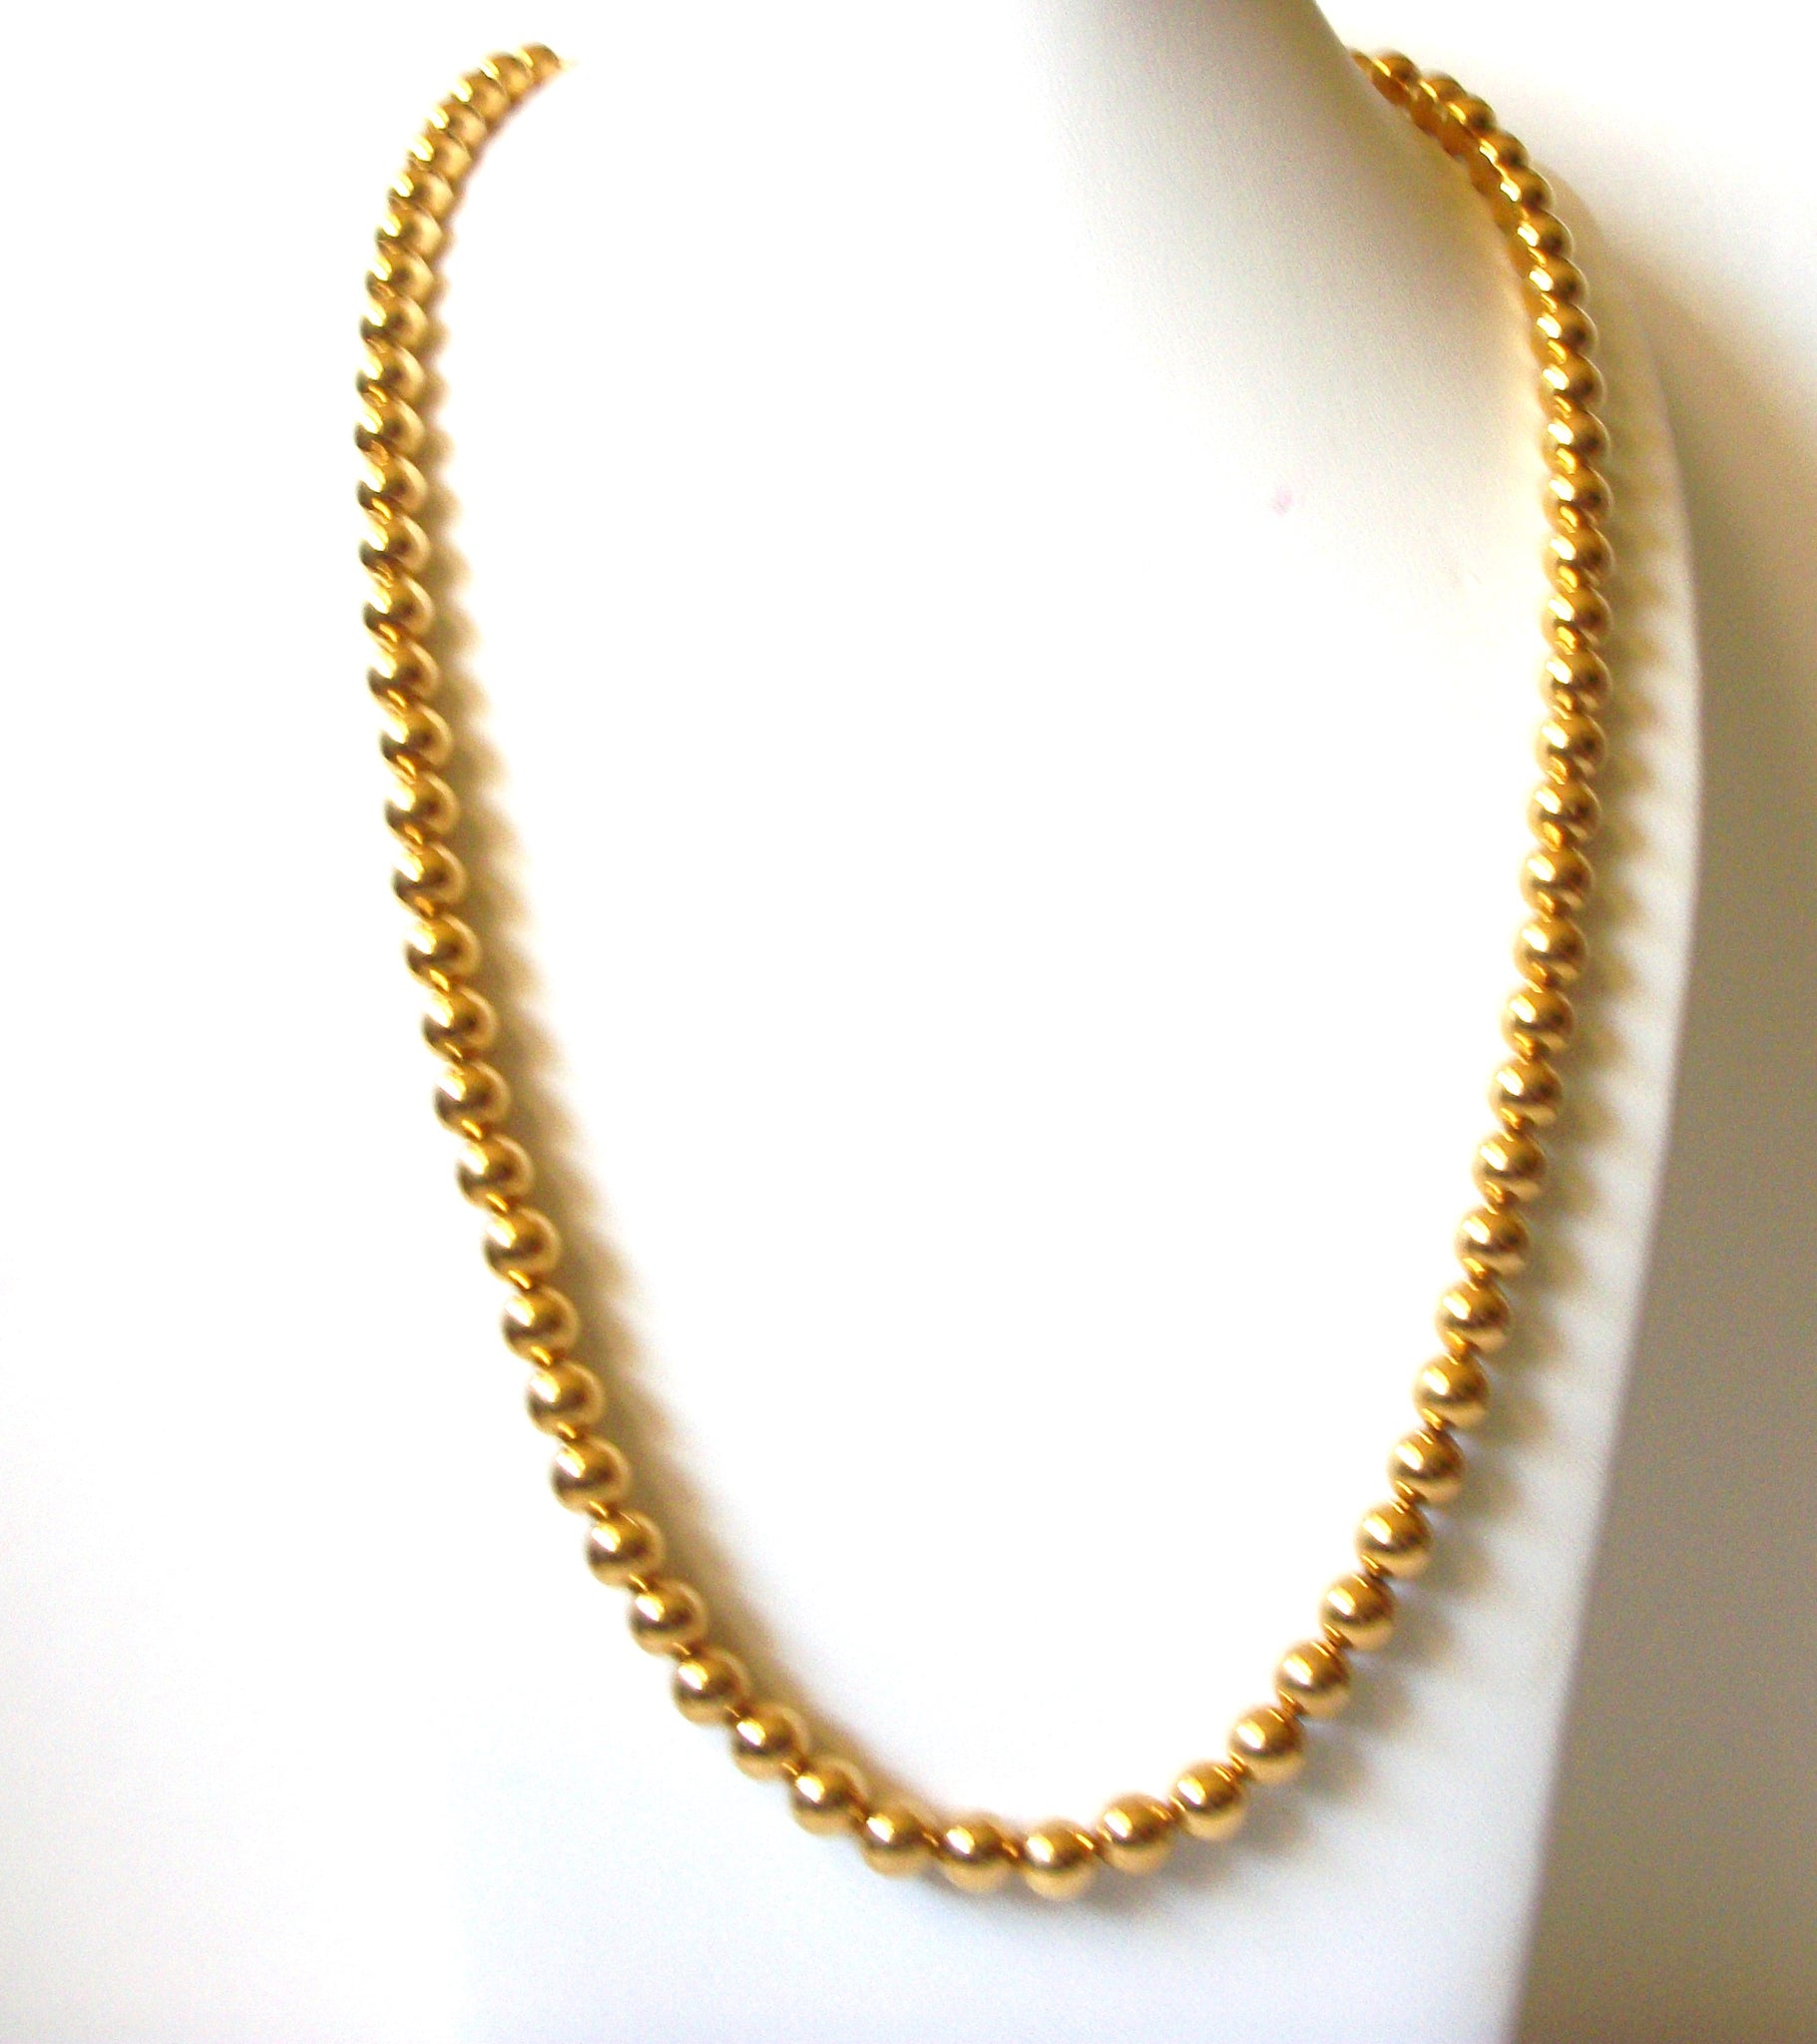 Napier Gold Link Chain Necklace Vintage – The Jewelry Lady's Store